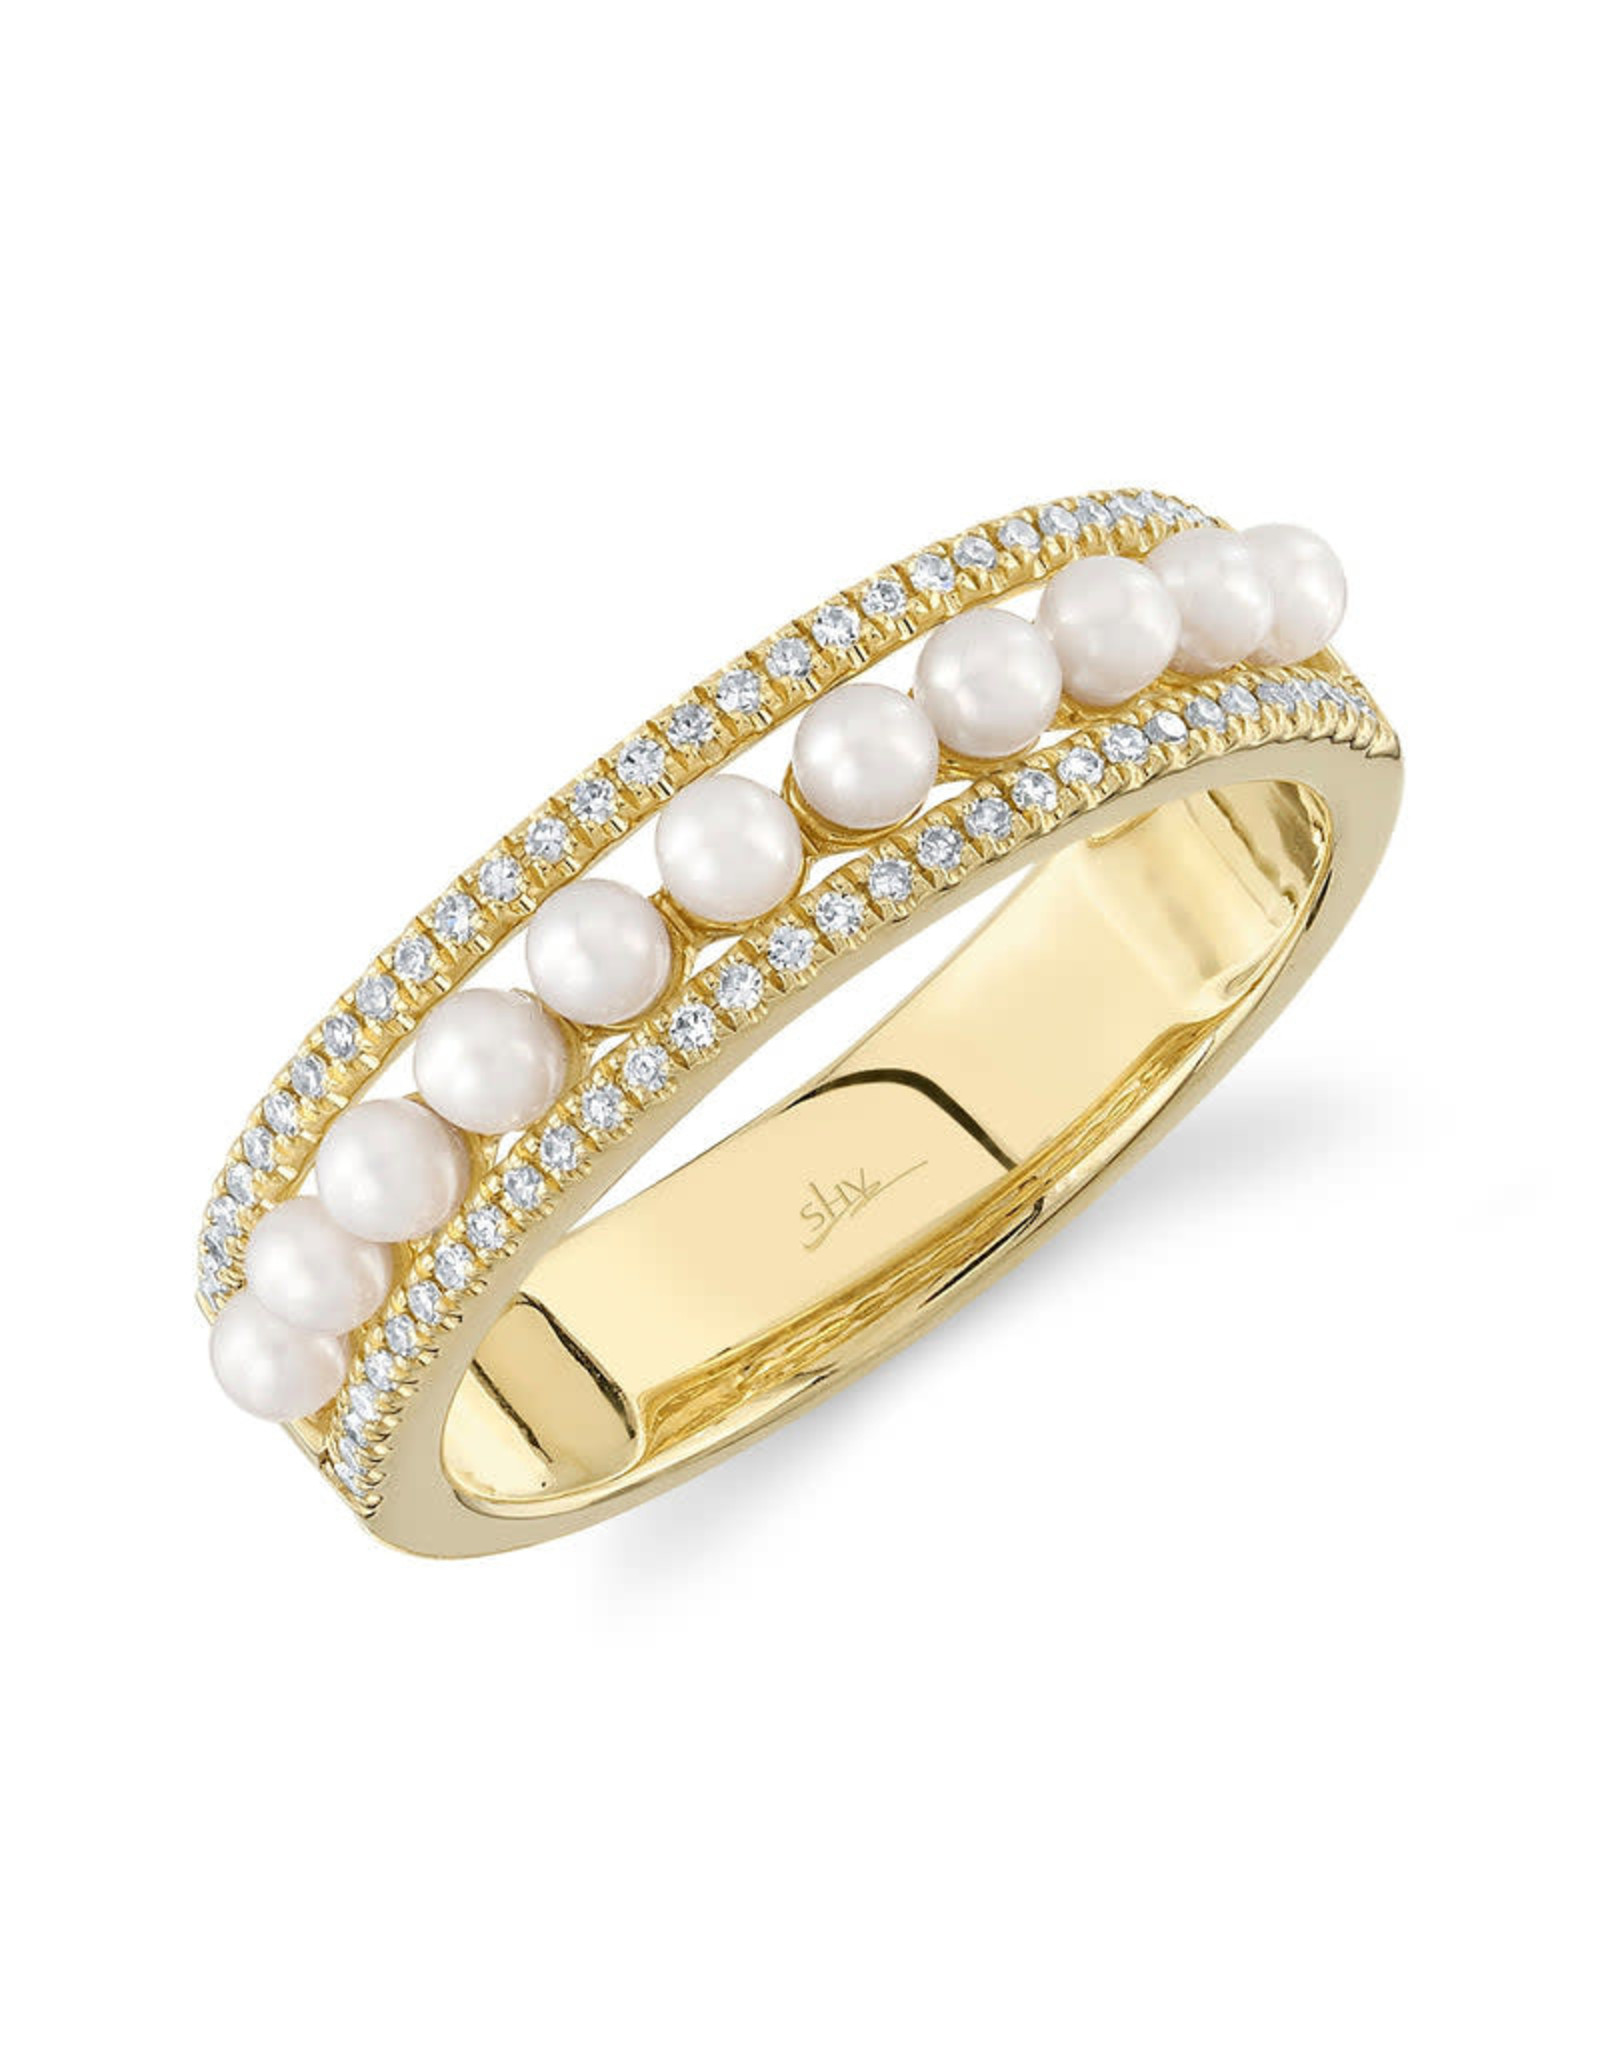 14K Yellow Gold Pearl and Diamond Triple Row Ring, D: 0.14ct